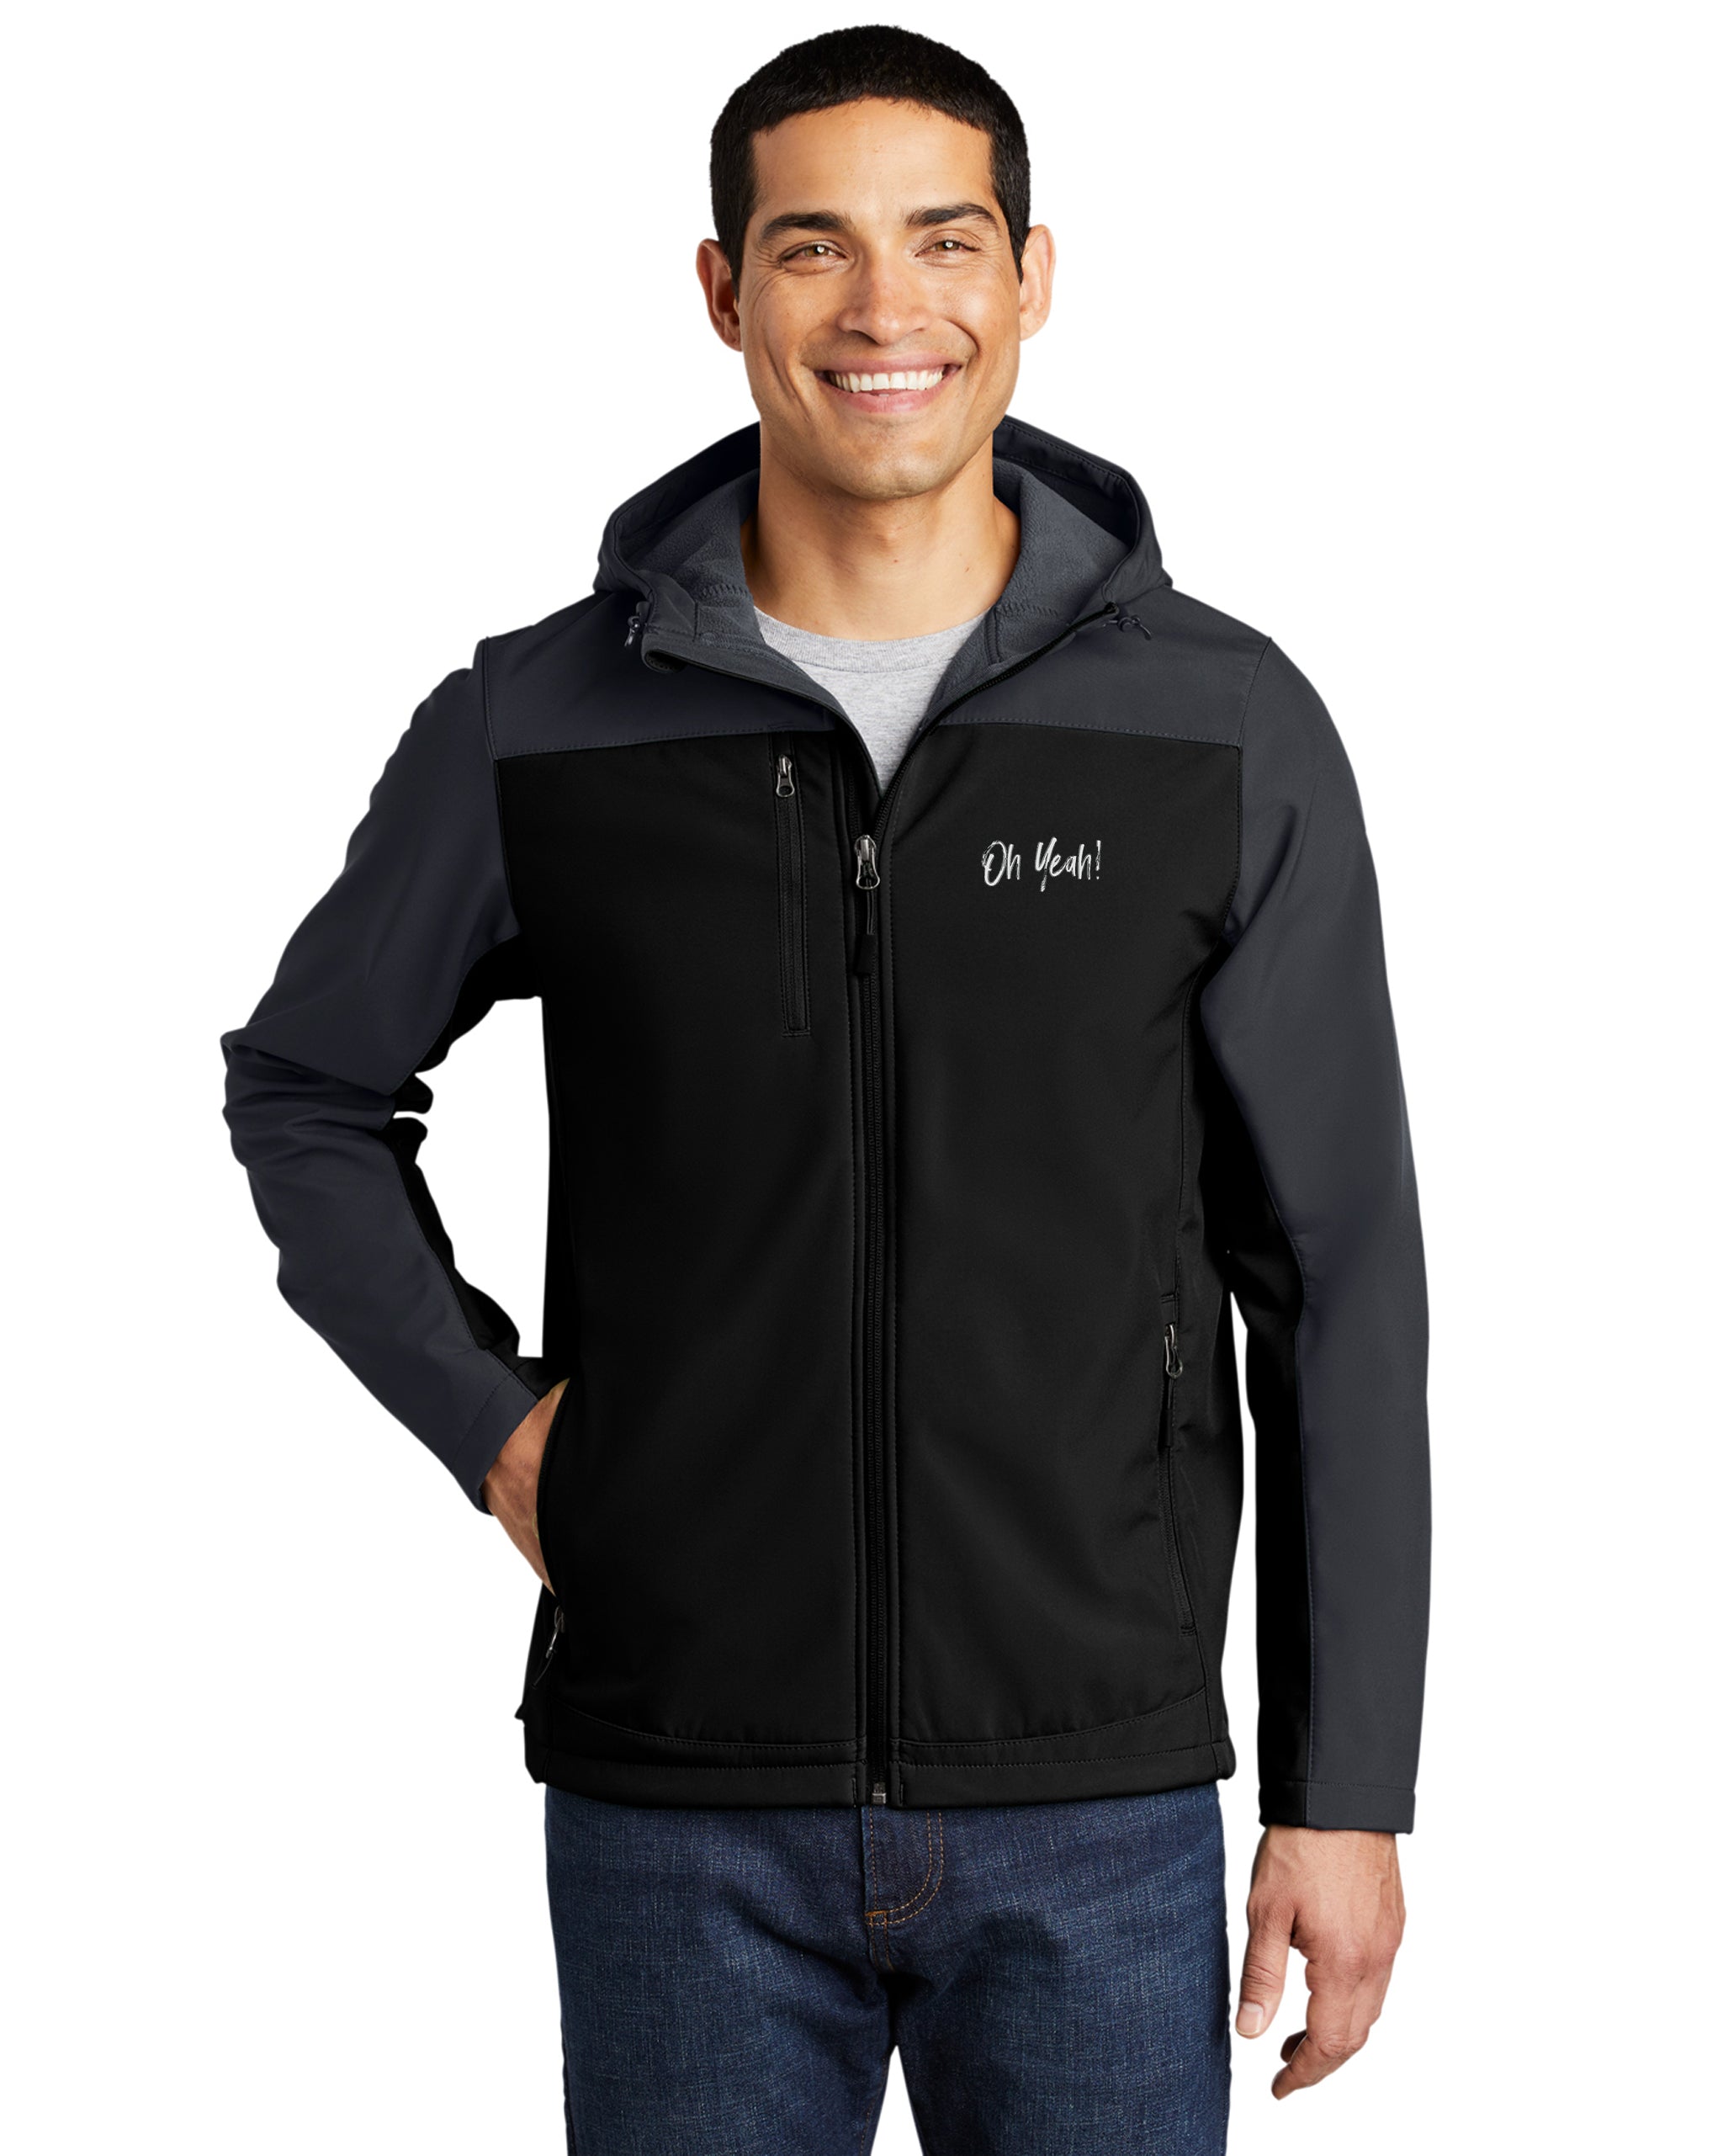 Oh Yeah - Port Authority Hooded Core Soft Shell Jacket - J335